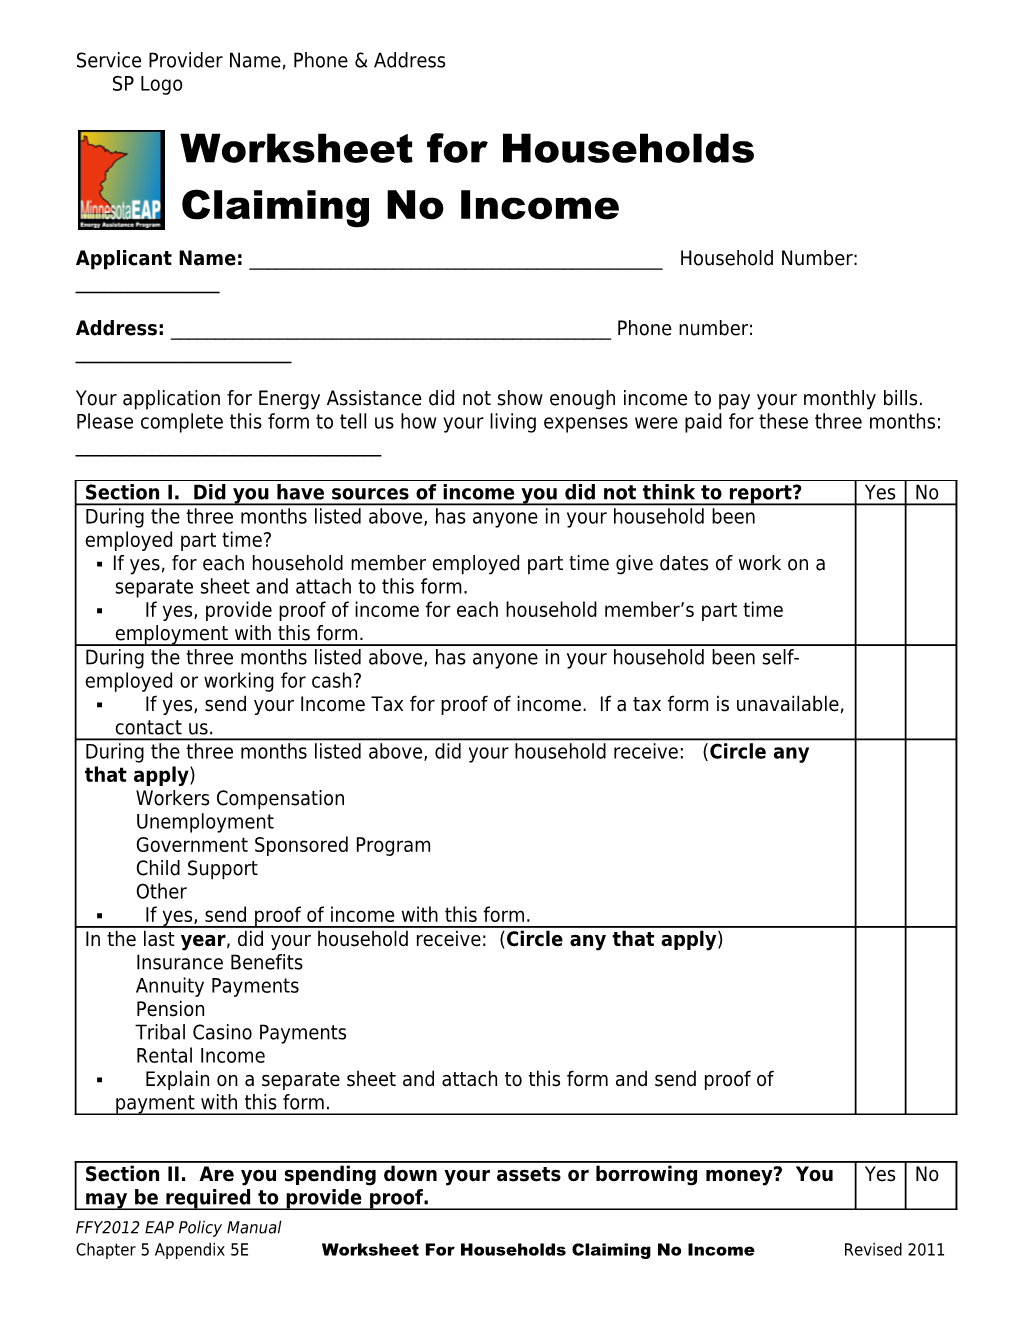 WORKSHEET for HOUSEHOLDS CLAIMING 0 to EXTREMELY LOW INCOME